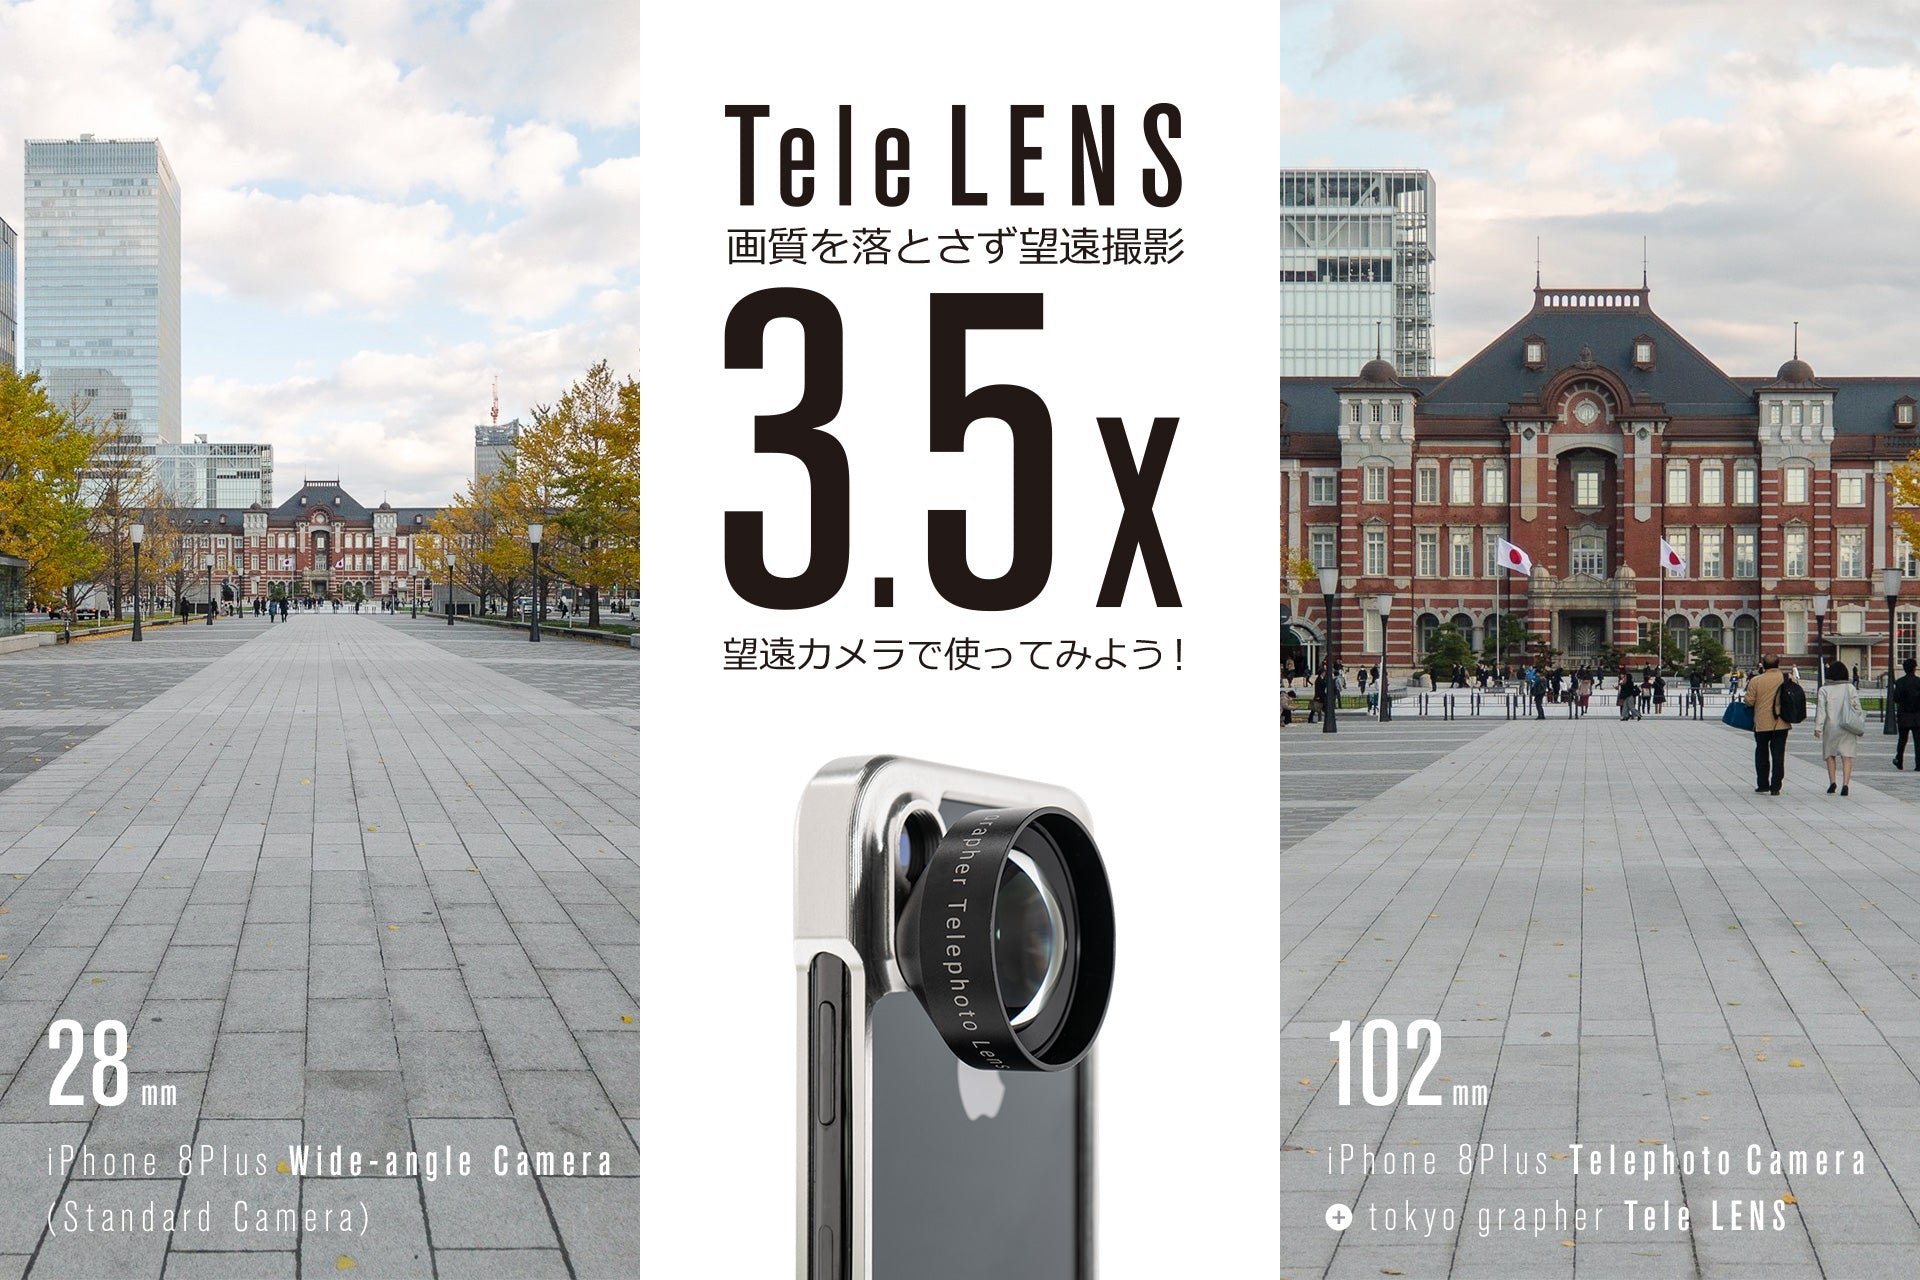 Let's use Tele LENS with a telephoto camera!